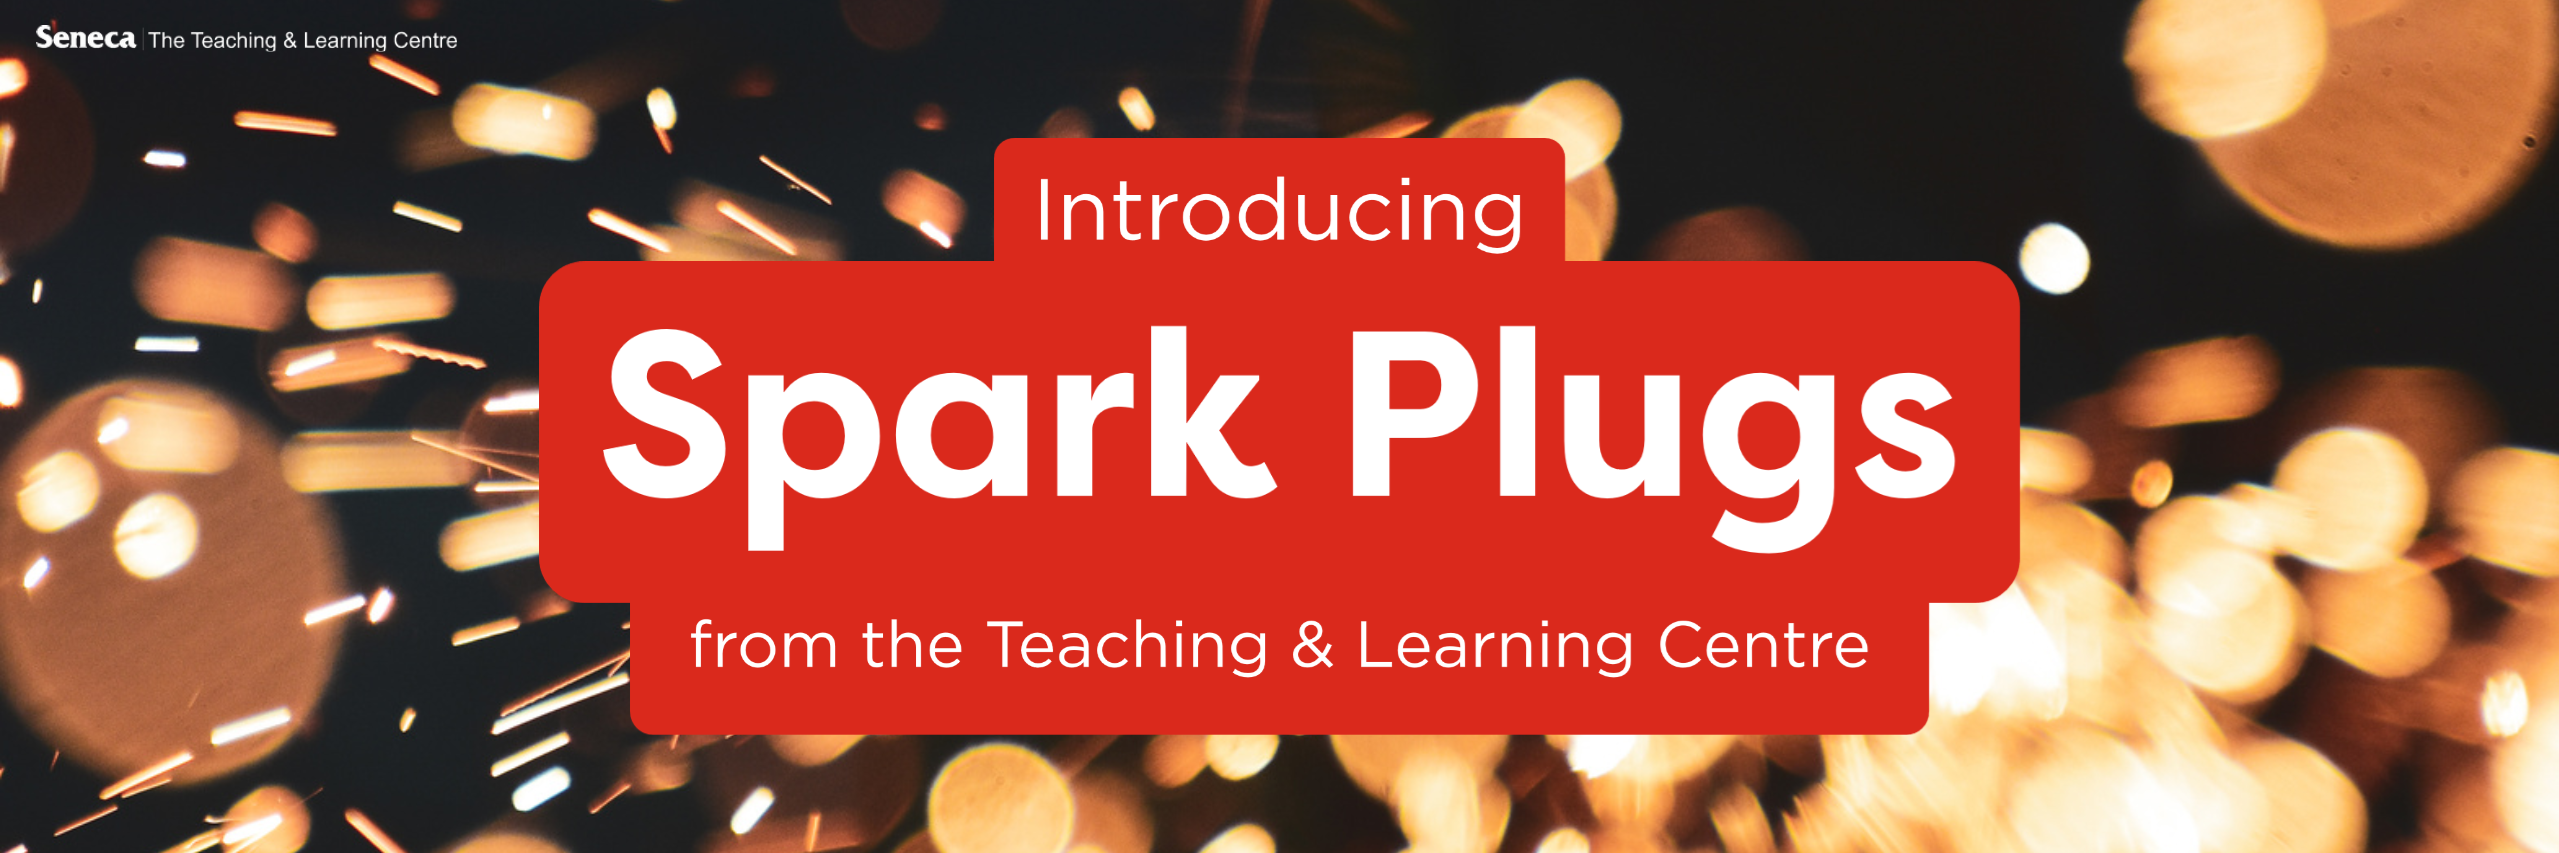 Introducing the Teaching & Learning Centre Spark Plugs